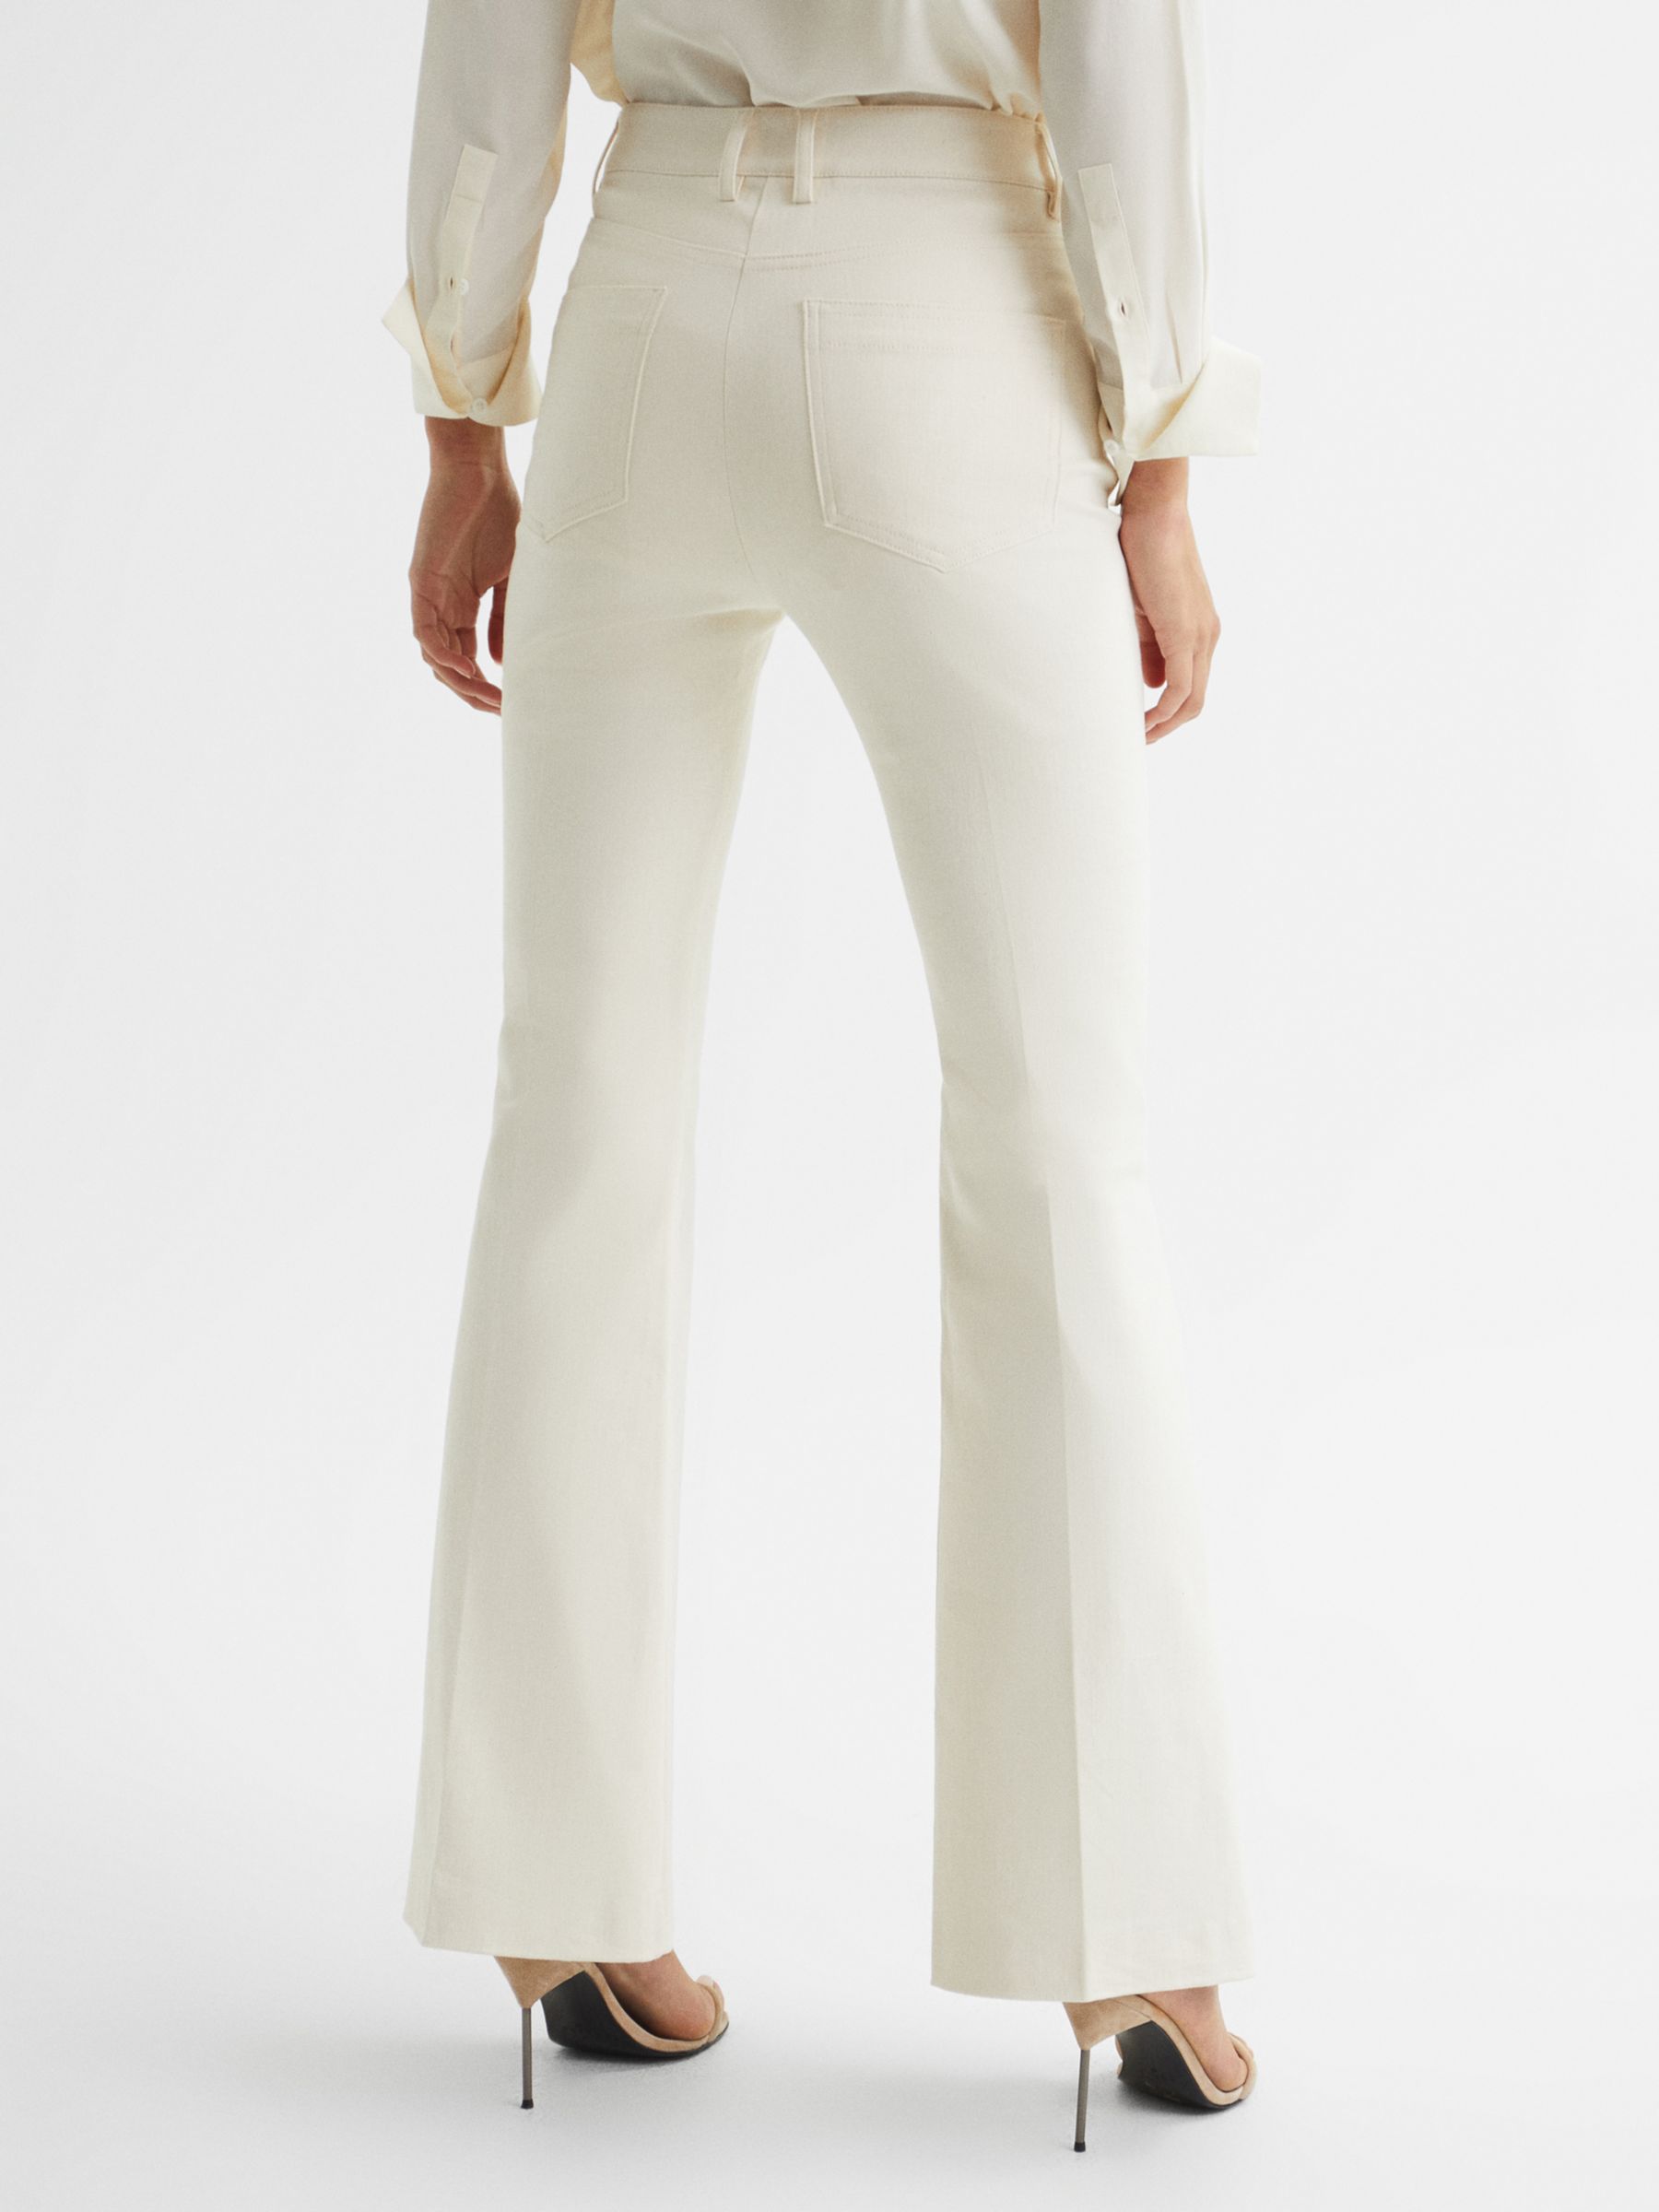 Reiss Florence Flared Trousers, Cream at John Lewis & Partners